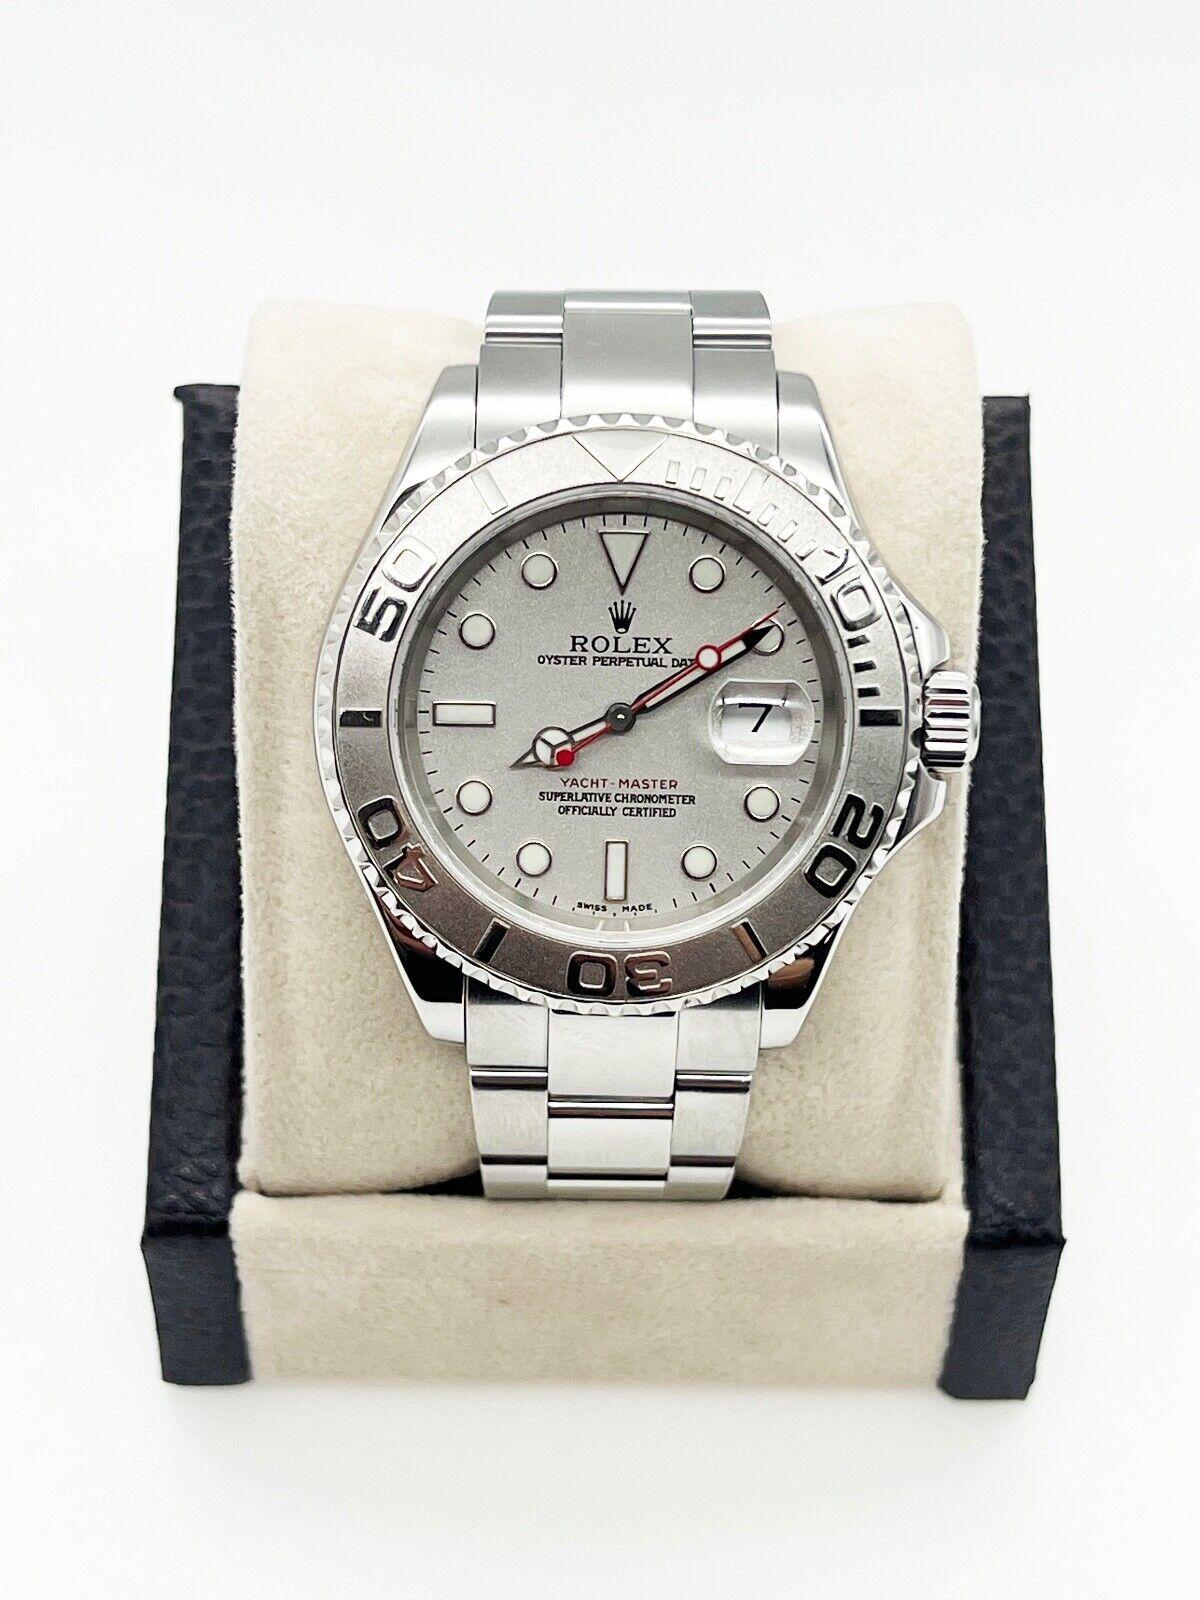 Rolex 16622 Yacht Master Platinum Dial Platinum Stainless Steel Box Papers In Excellent Condition For Sale In San Diego, CA